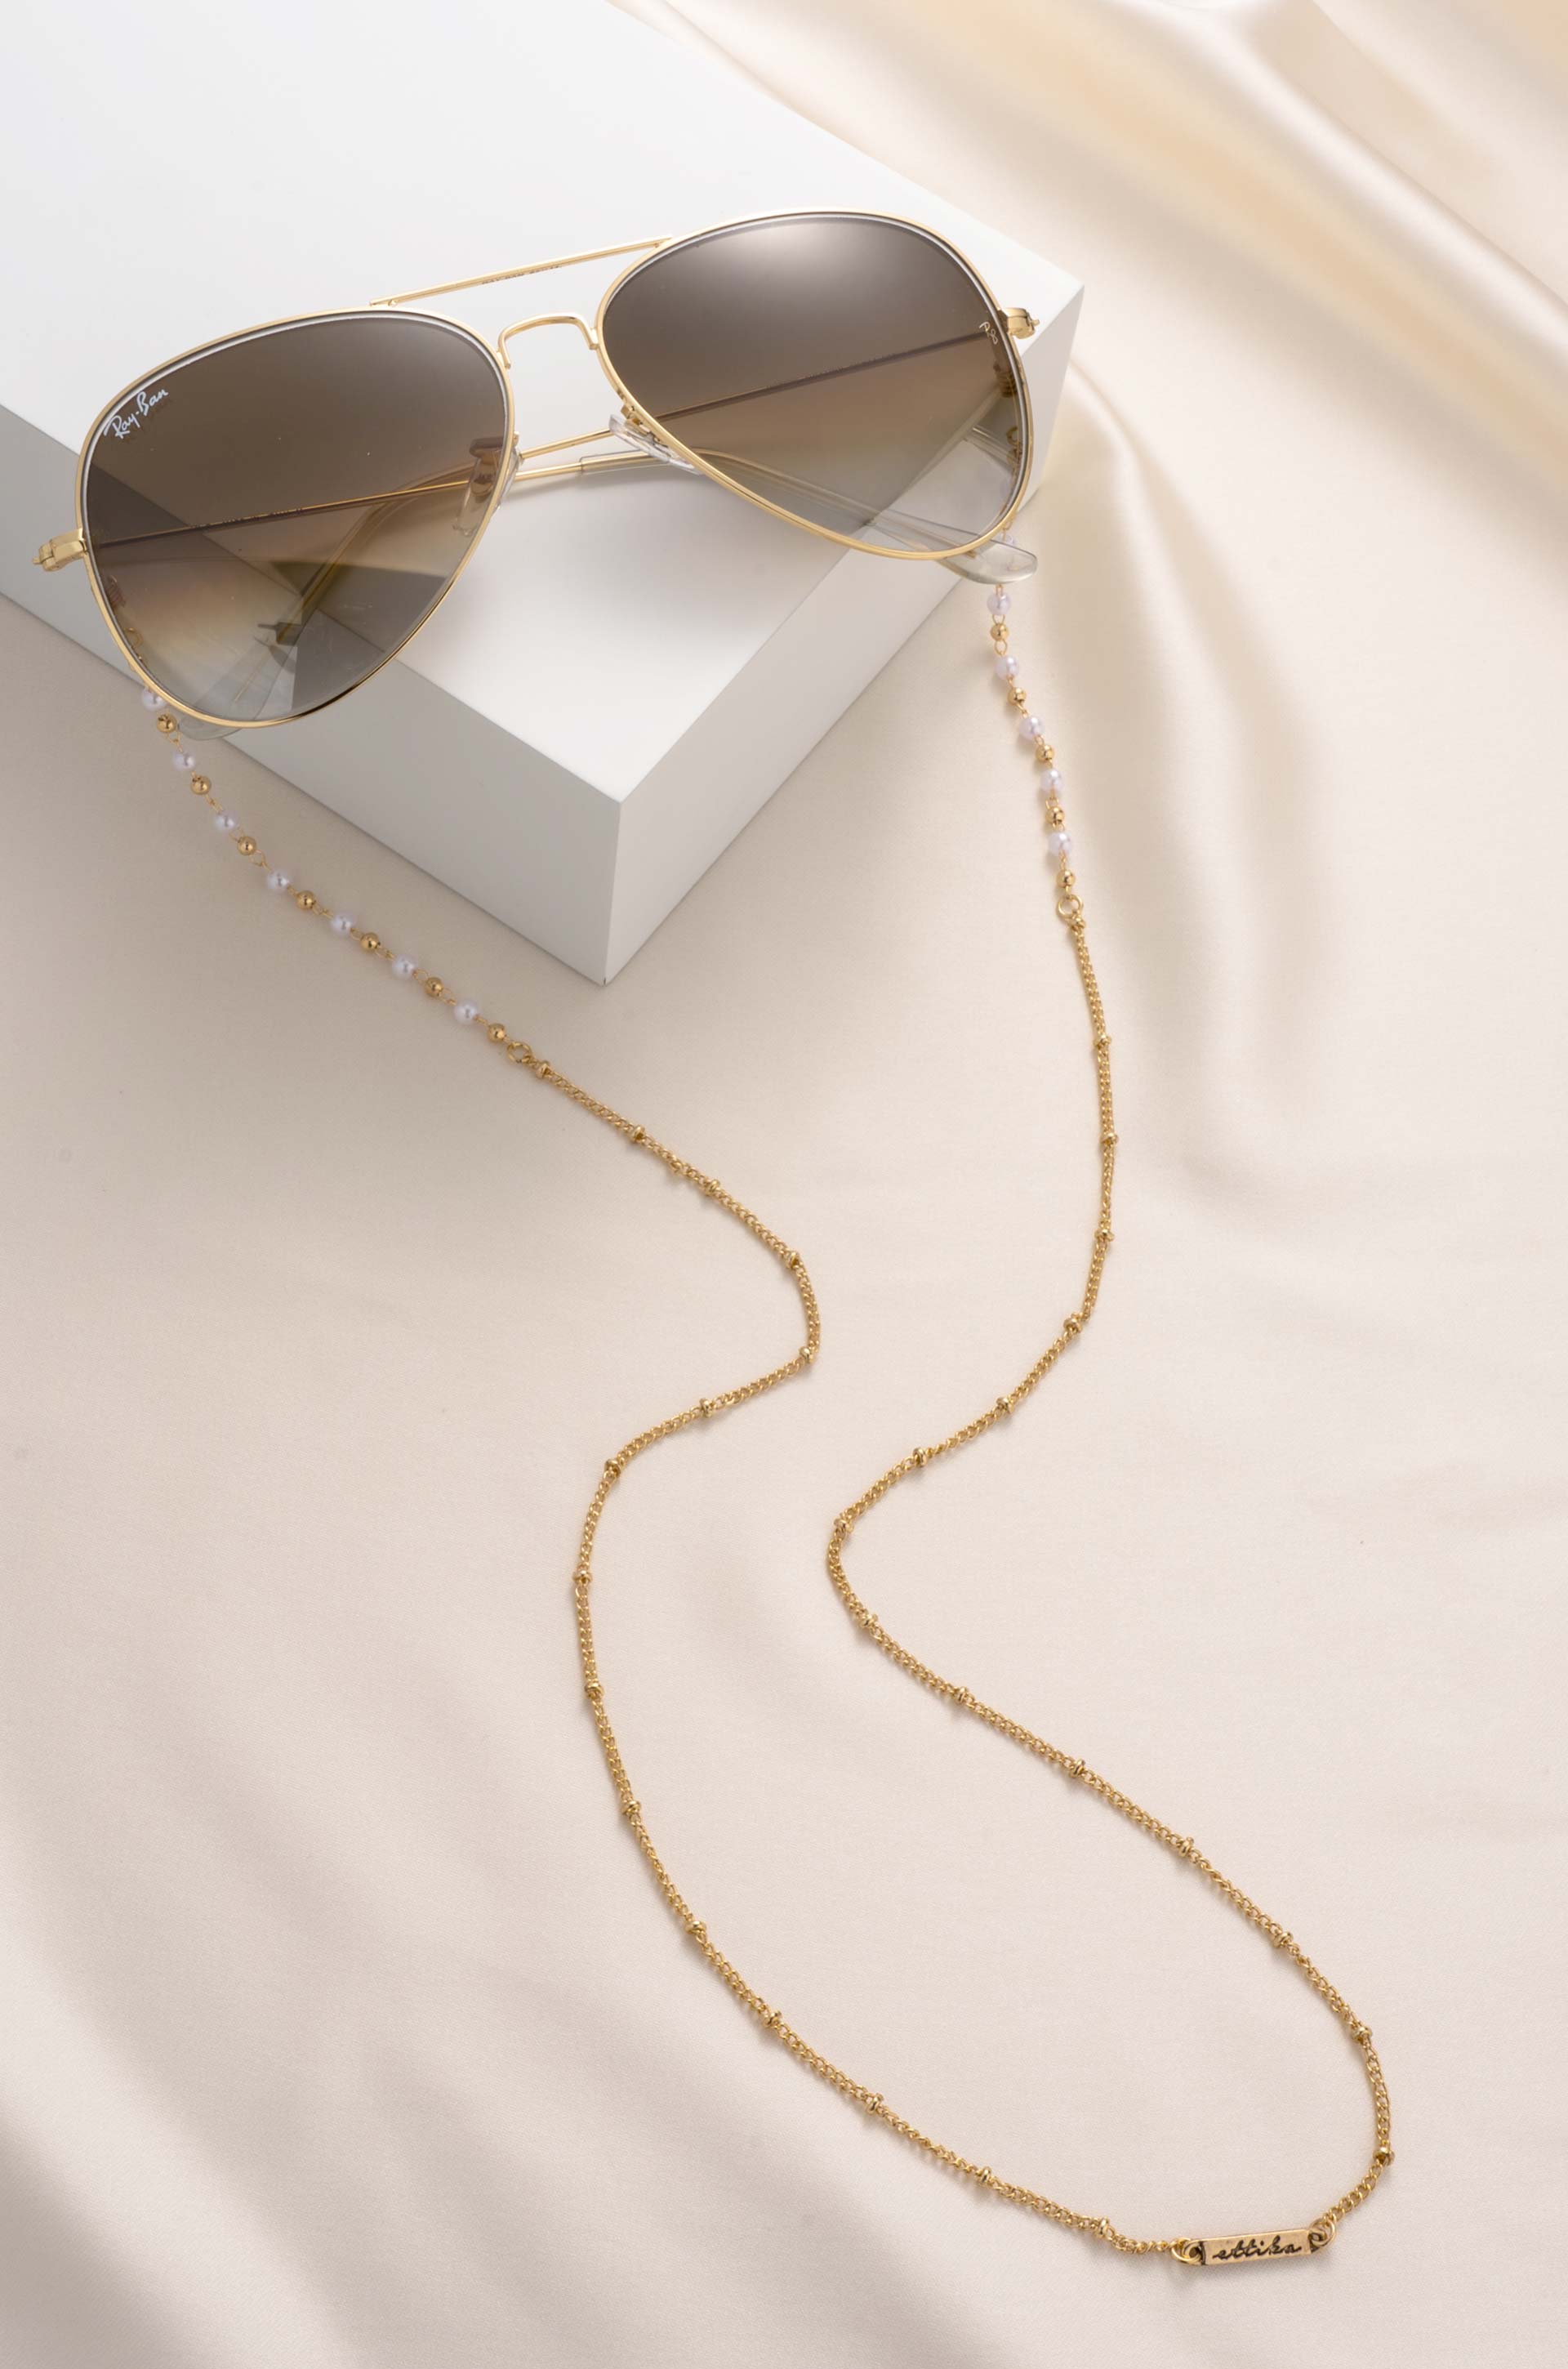 Dainty Pearl and Gold Glasses Chain on slate